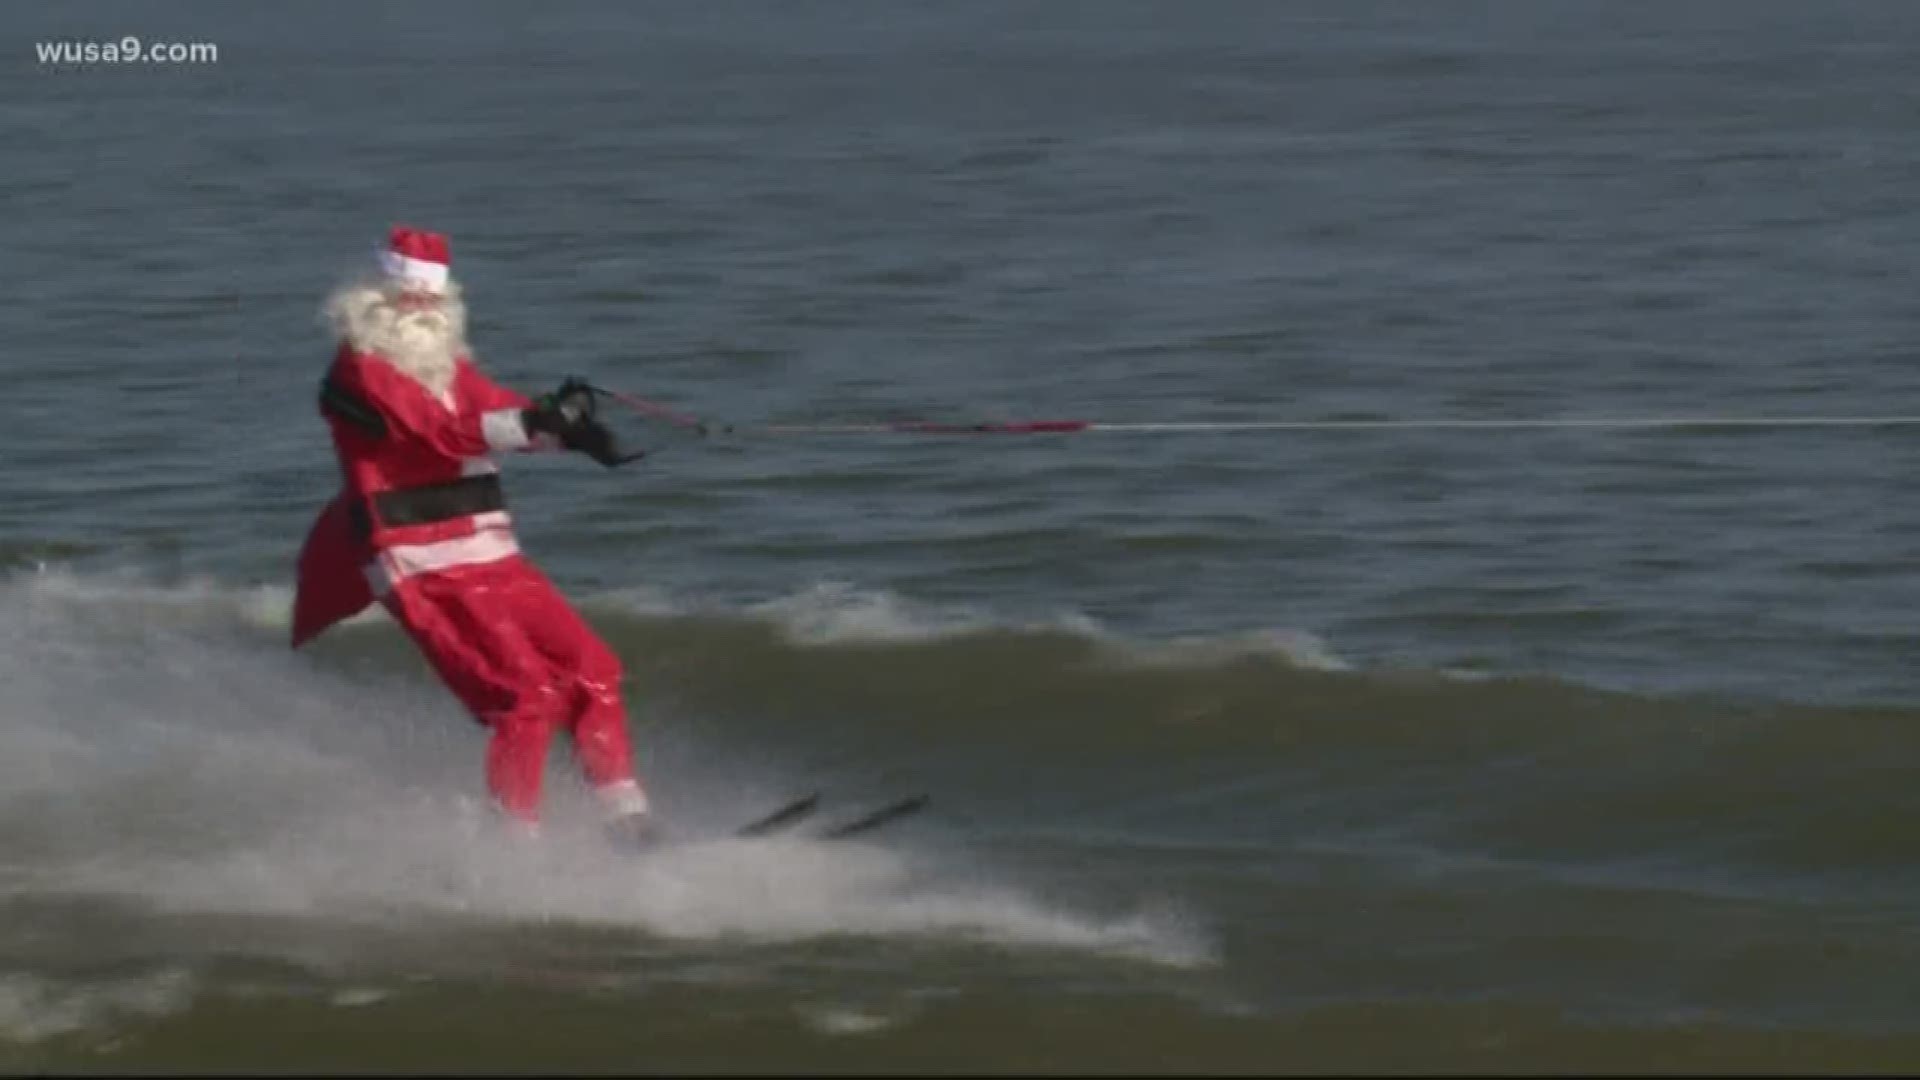 The tradition started in 1986, and Santa has been water skiing ever since.